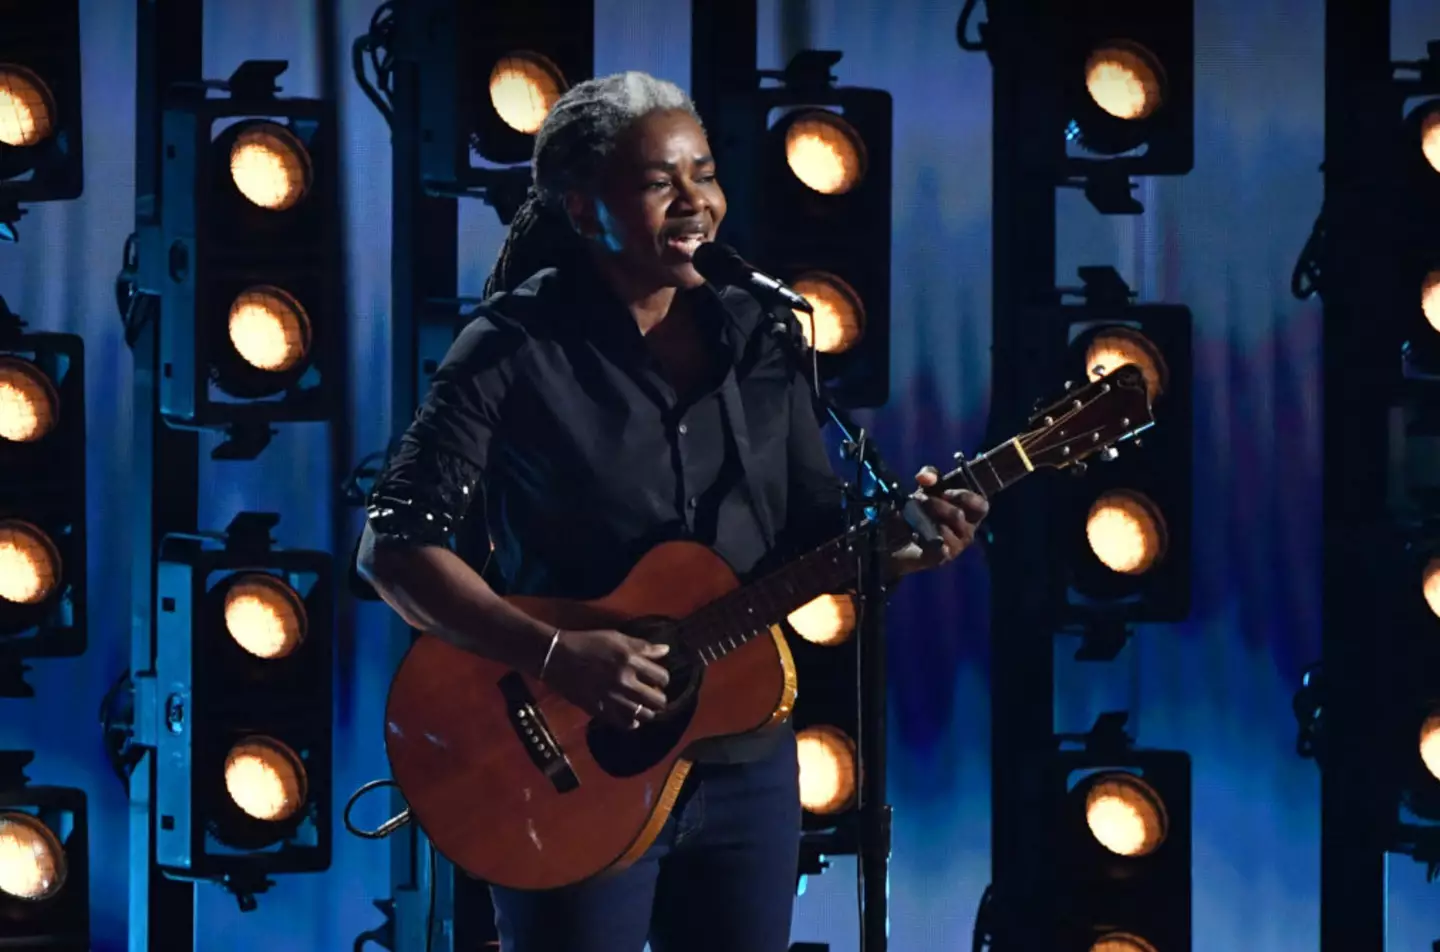 Tracy Chapman performed her 1988 hit alongside Luke Combs at this year's Grammy Awards.